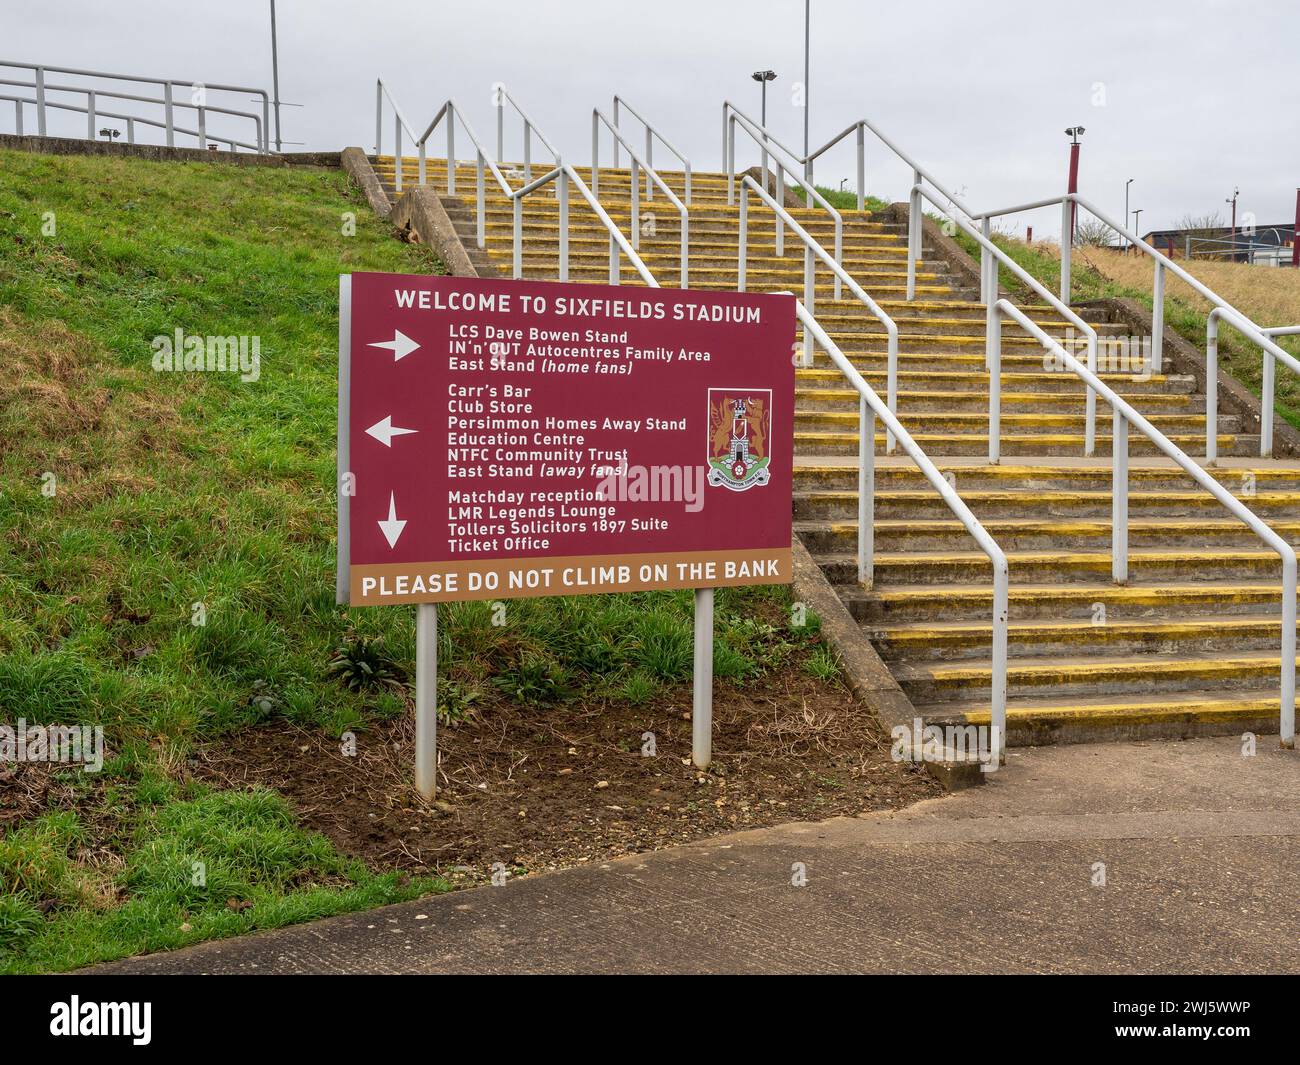 Signage at Sixfields Stadium, home ground to the league team Northampton Town Football Club (known as the Cobblers), Northampton, UK Stock Photo